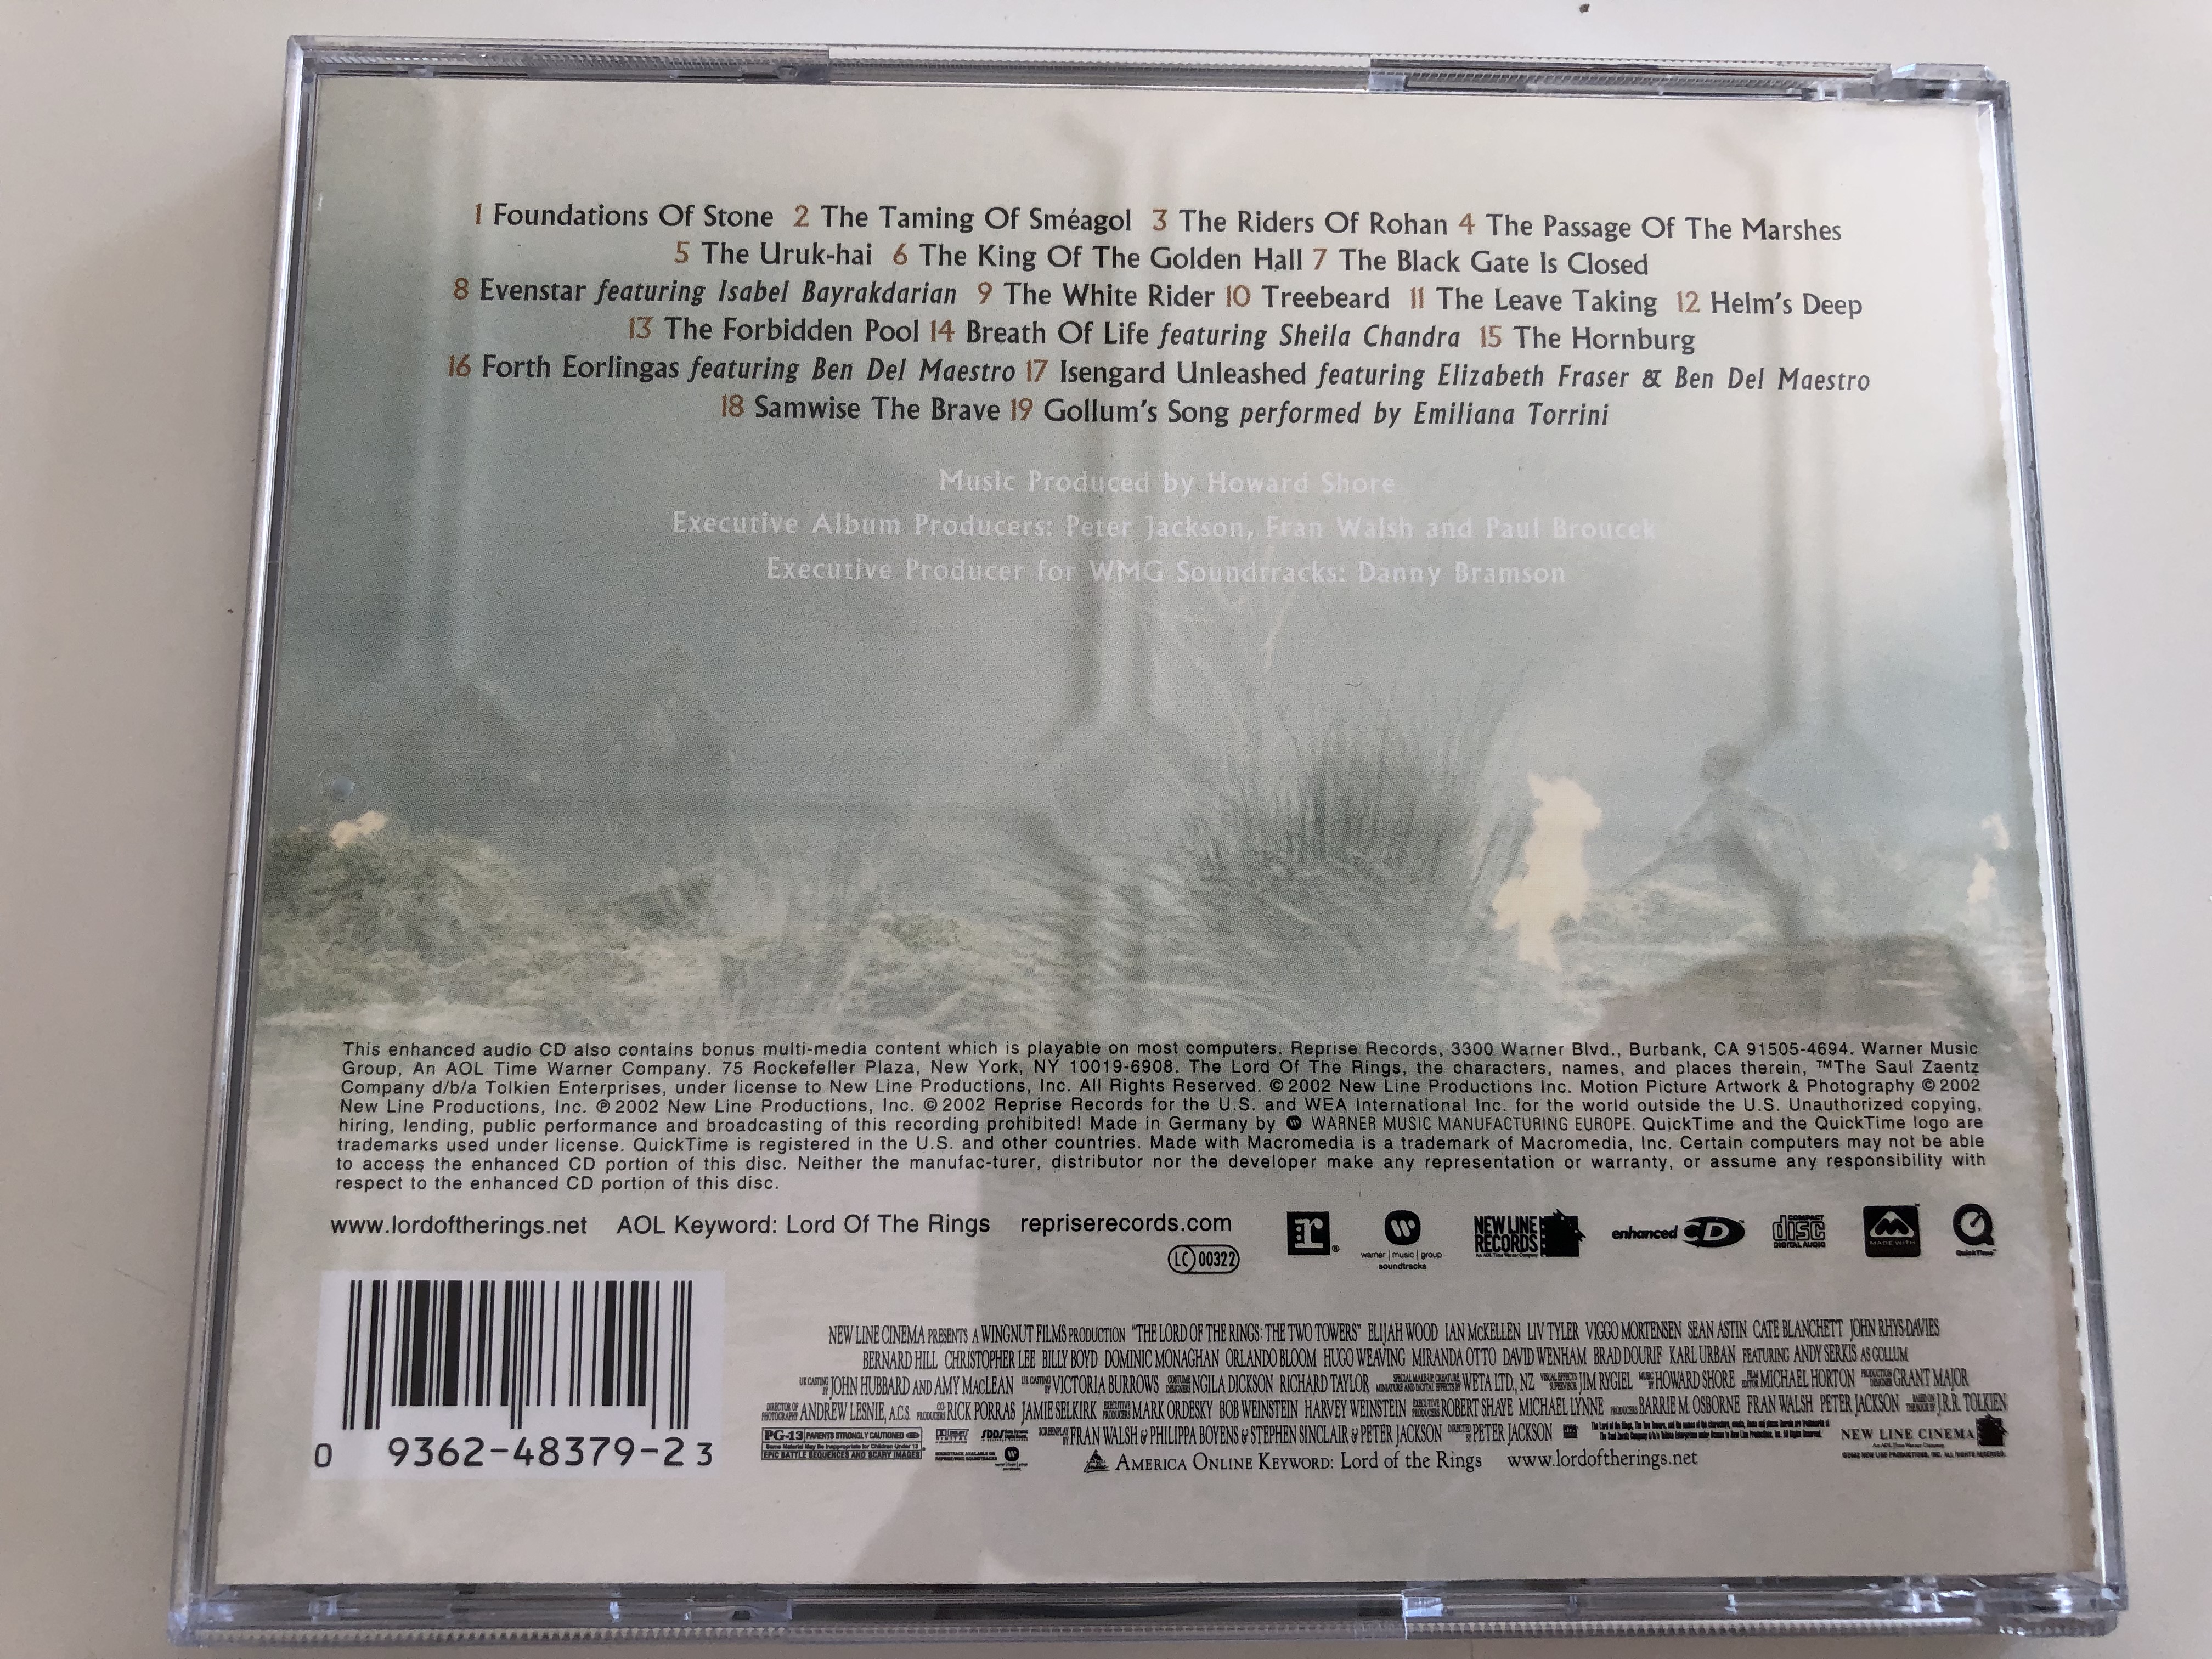 the-lord-of-the-rings-the-two-towers-original-motion-picture-soundtrack-music-composed-orchestrated-and-conducted-by-howard-shore-audio-cd-2002-warner-music-8-.jpg